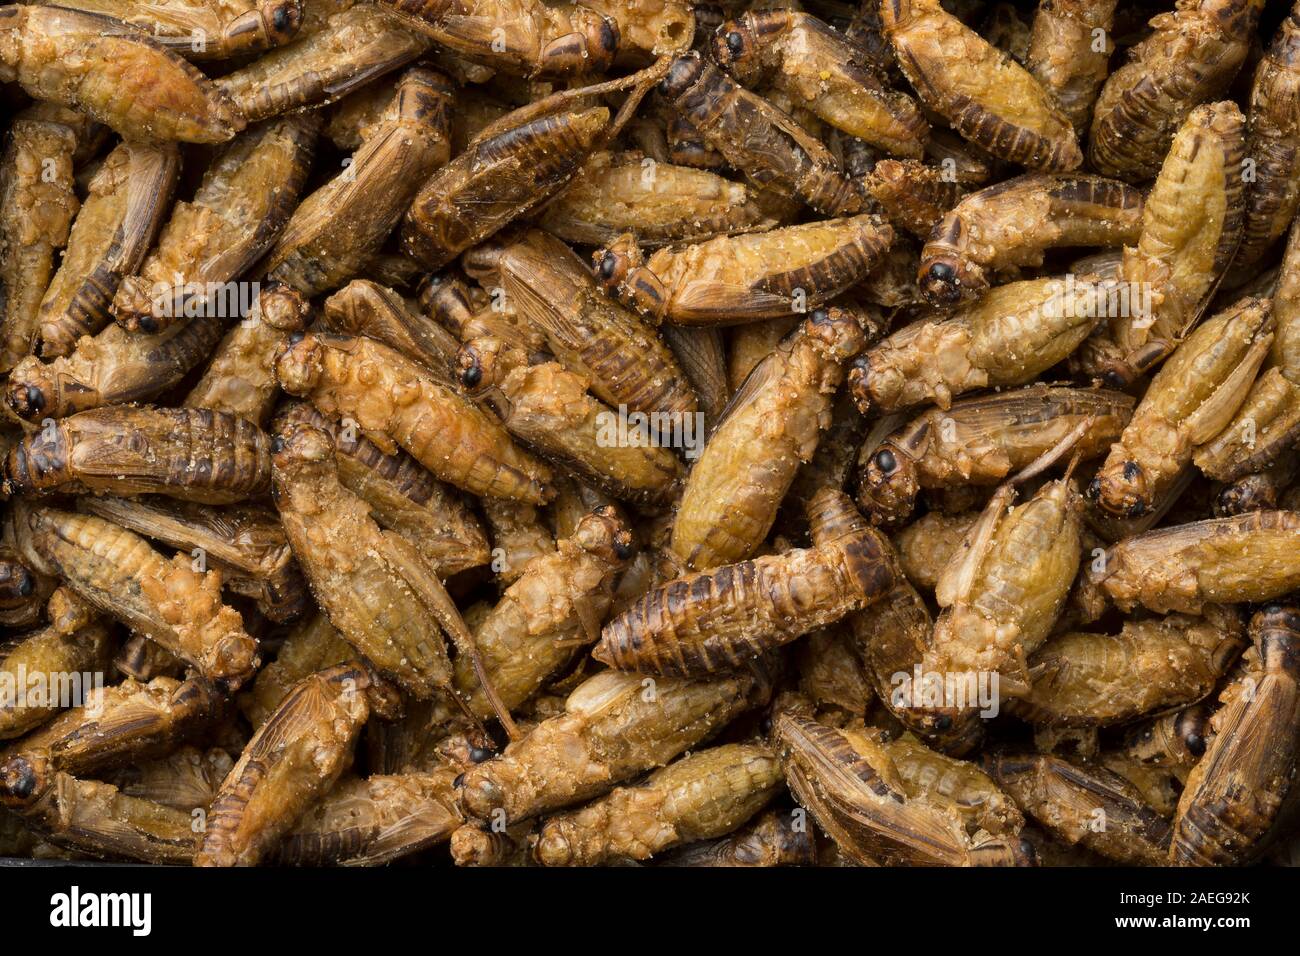 Crispy salted small crickets for a snack full frame Stock Photo